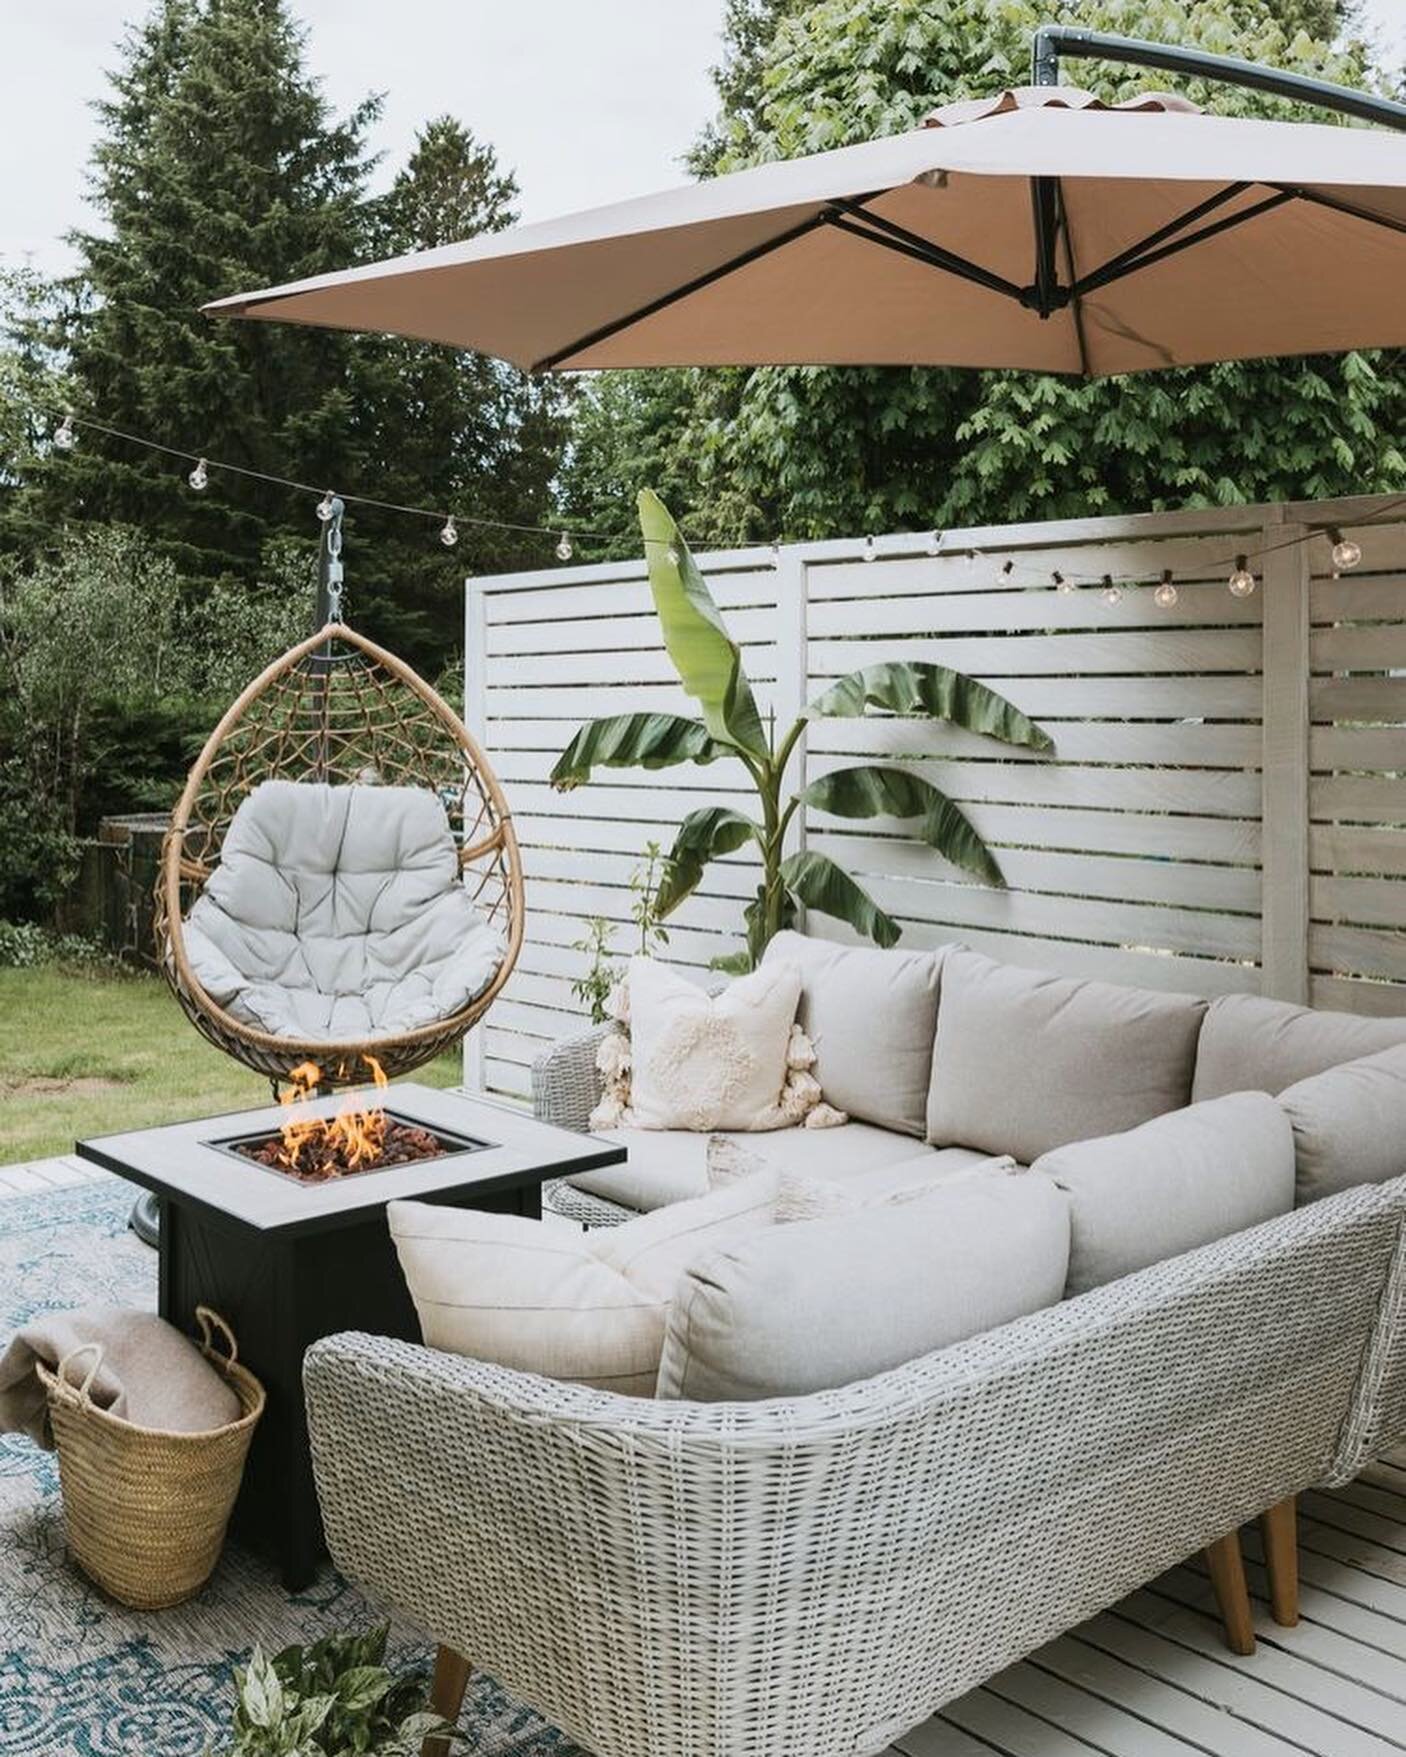 Patio season is here ☀️

Take a look at some of our inspo when it comes to setting up your outdoor space 👉🏻

We think Edison bulb string lights are a must, adding plants create that summer oasis feel 🌿 and cushions maximize comfort. Oh, and don&rs